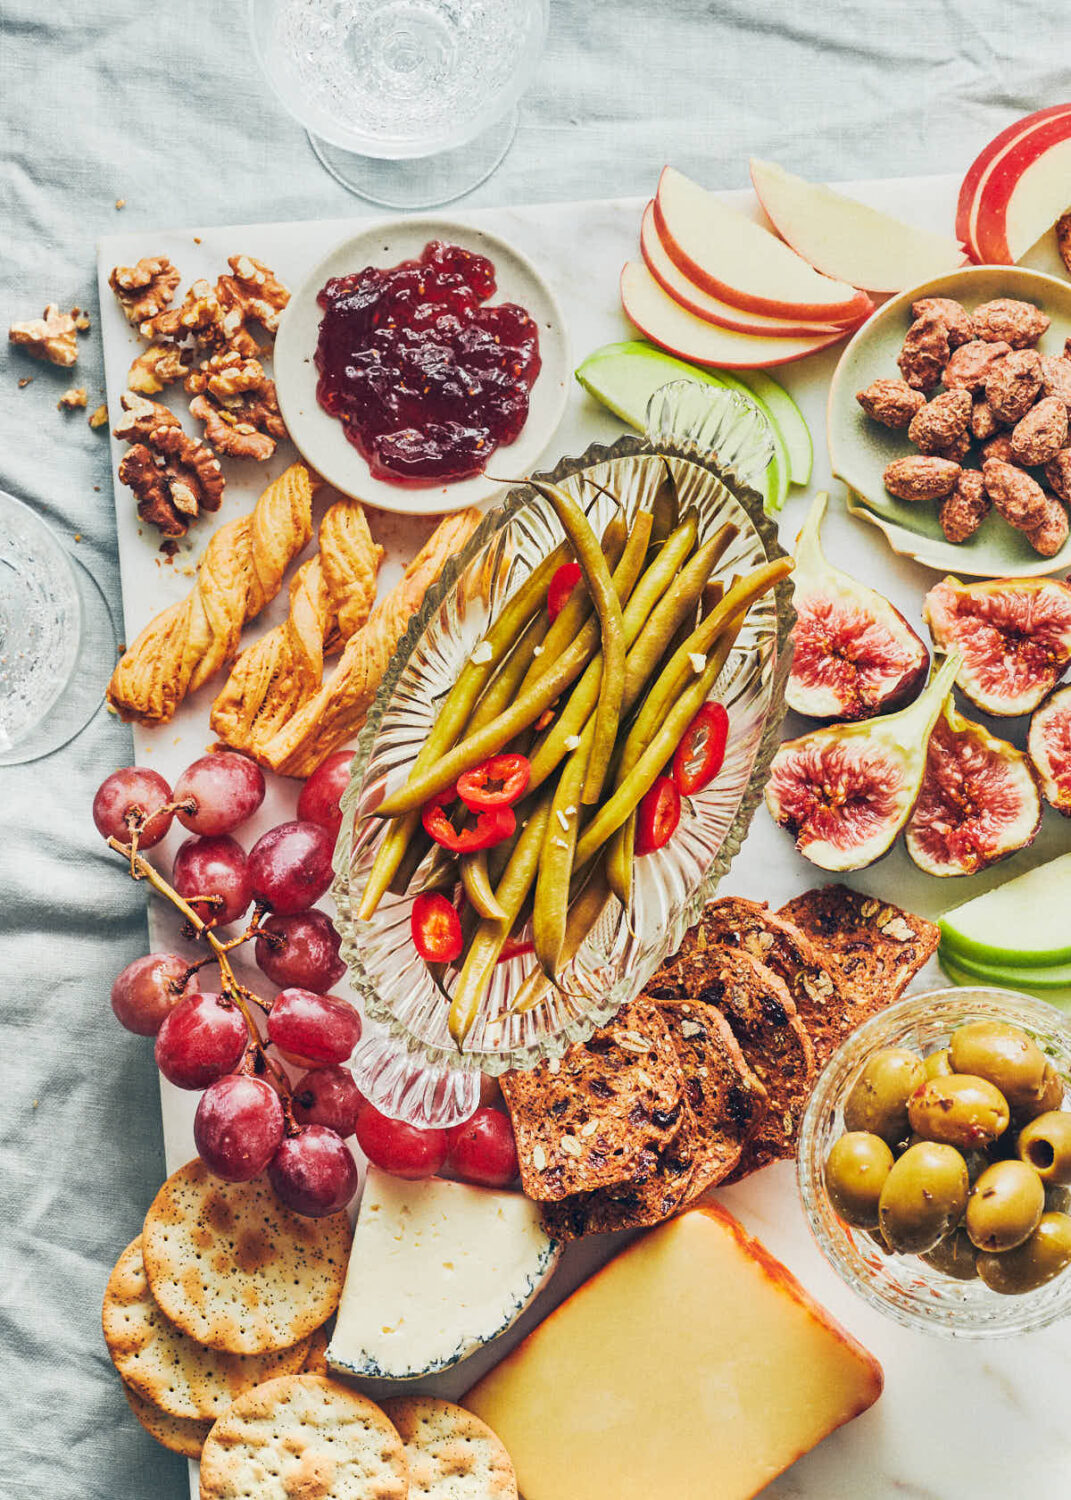 Snack board with fruit, crackers, olives, jam and pickled green beans on a table